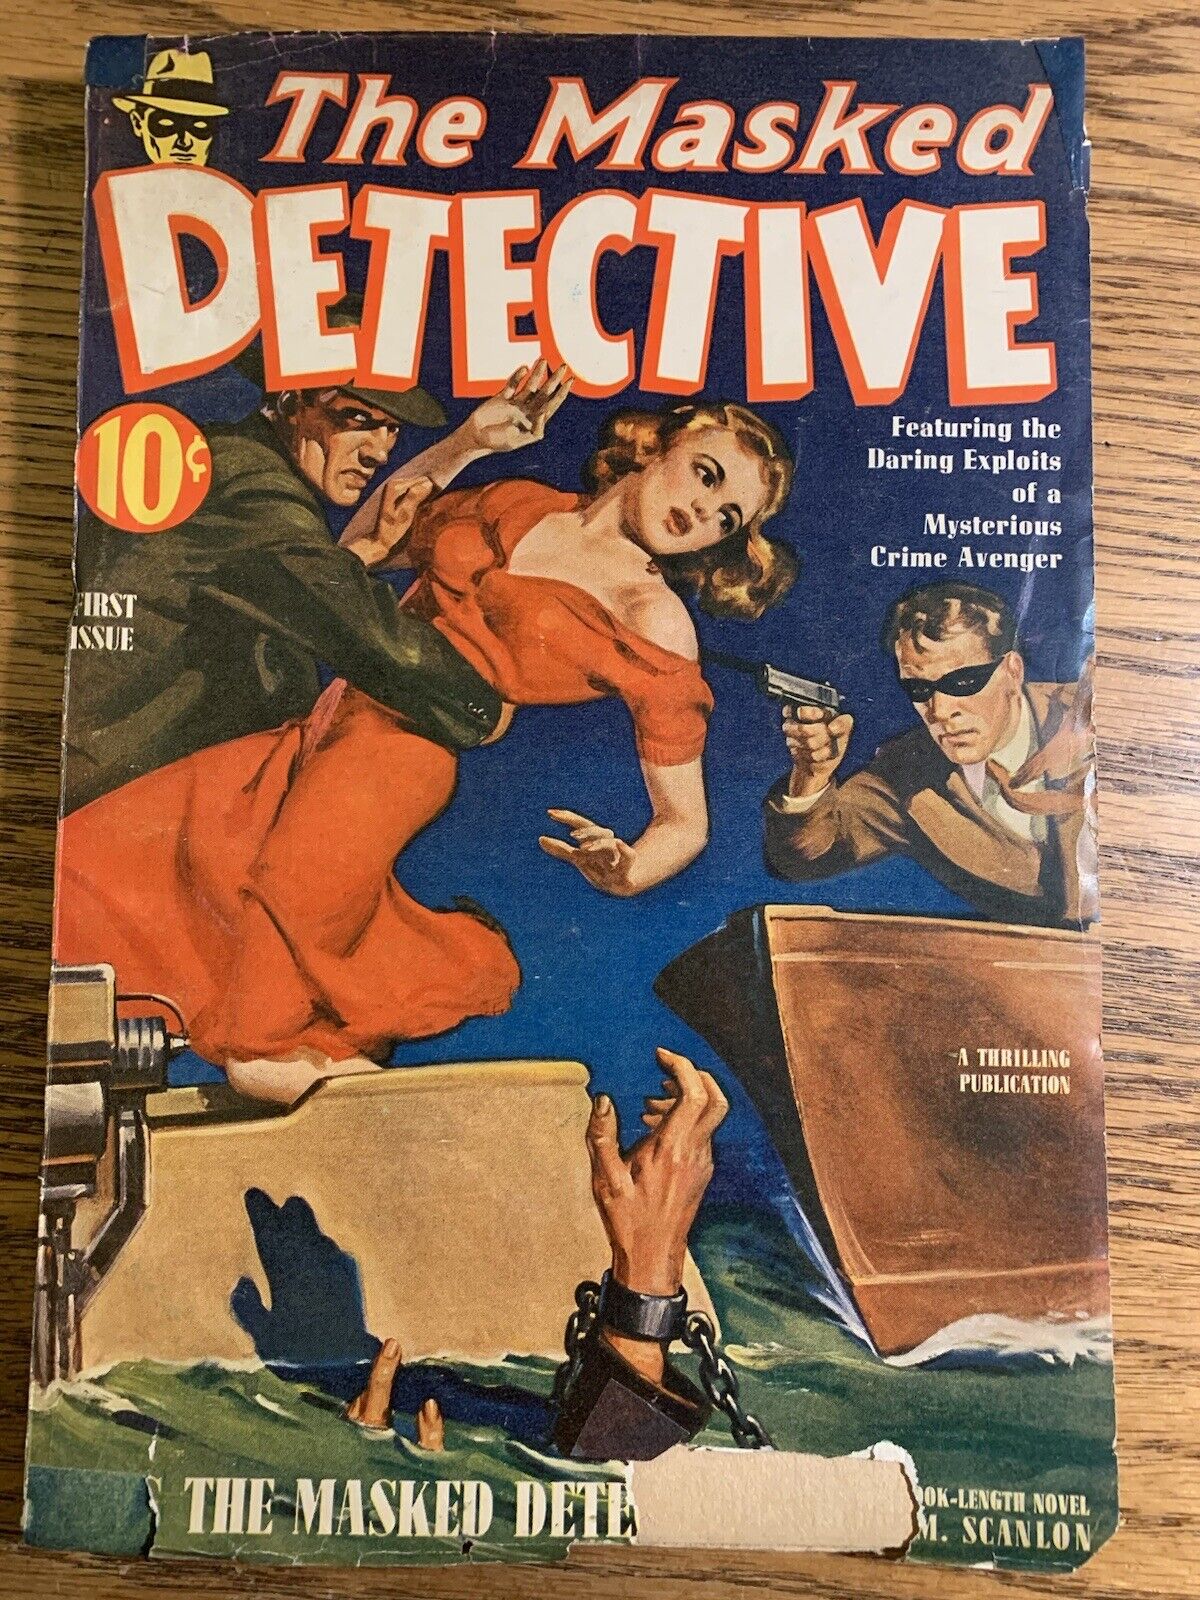 The Masked Detective Pulp Magazine Fall 1940 - First Issue